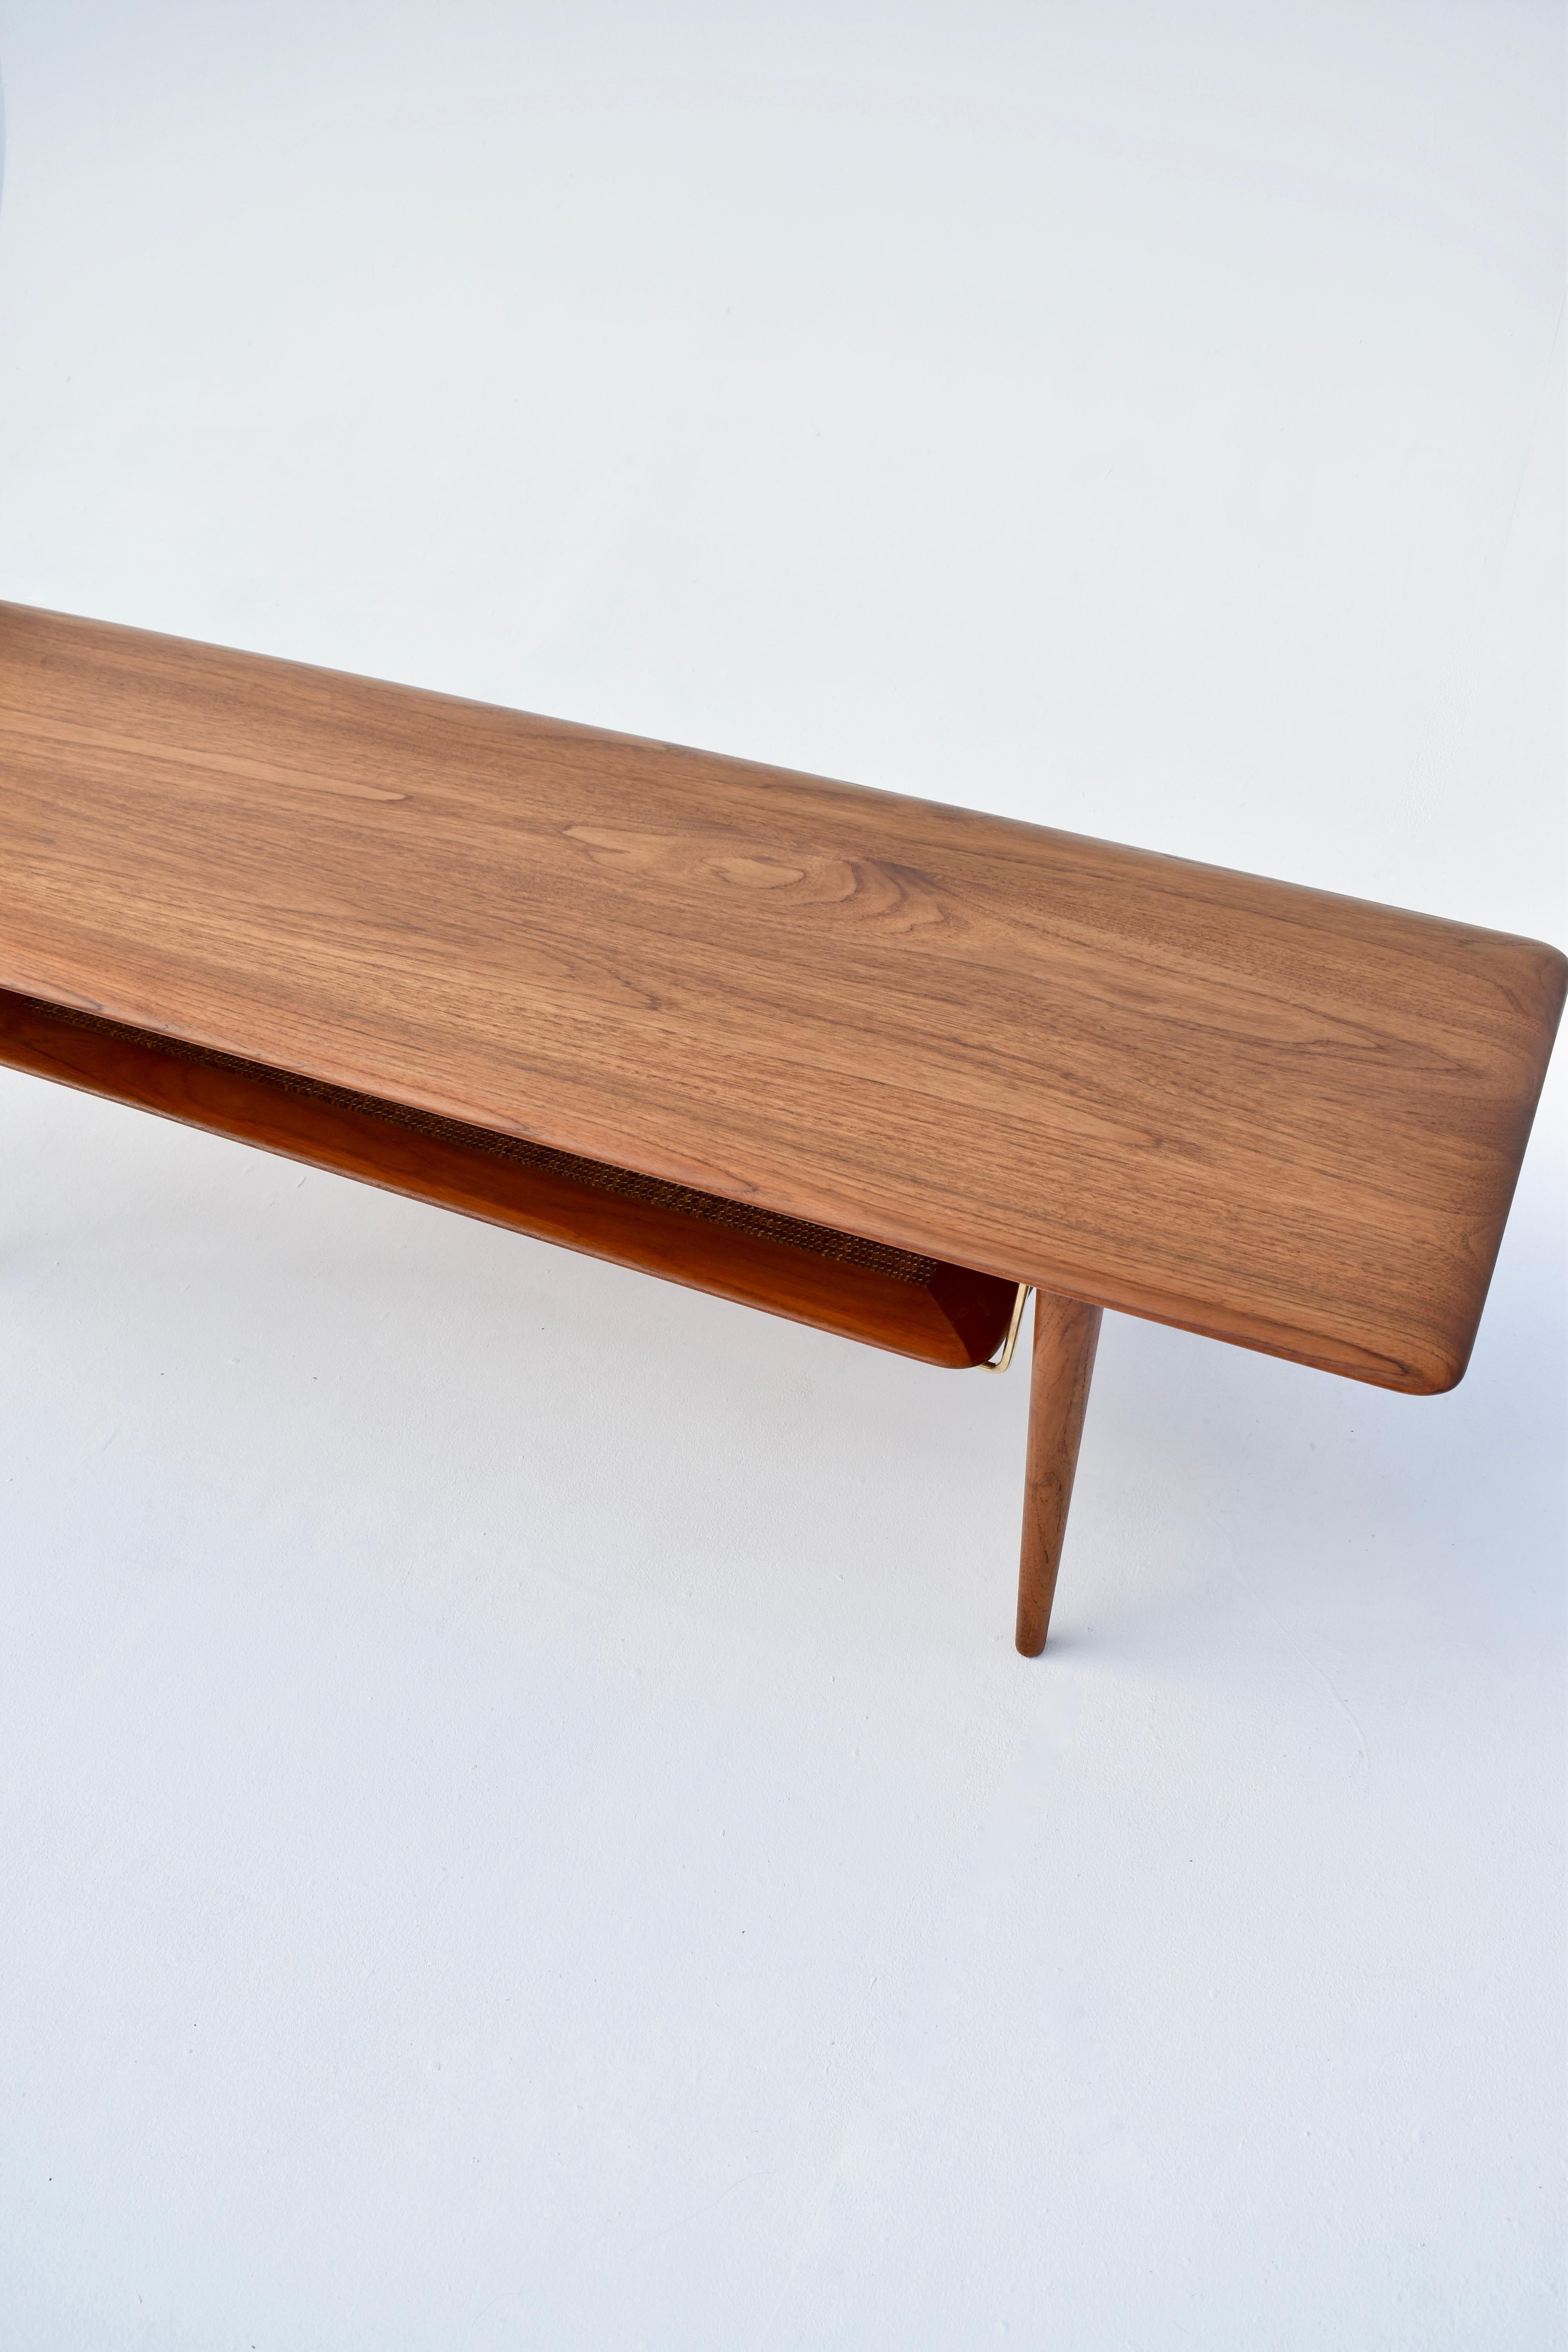 Incredibly elegant long, low coffee table designed in the early 50’s by Architects Peter Hvidt & Orla Molgaard Nielsen.

Constructed entirely from solid Teak with a beautifully profiled surface, beneath is a Rattan shelf suspended on brass